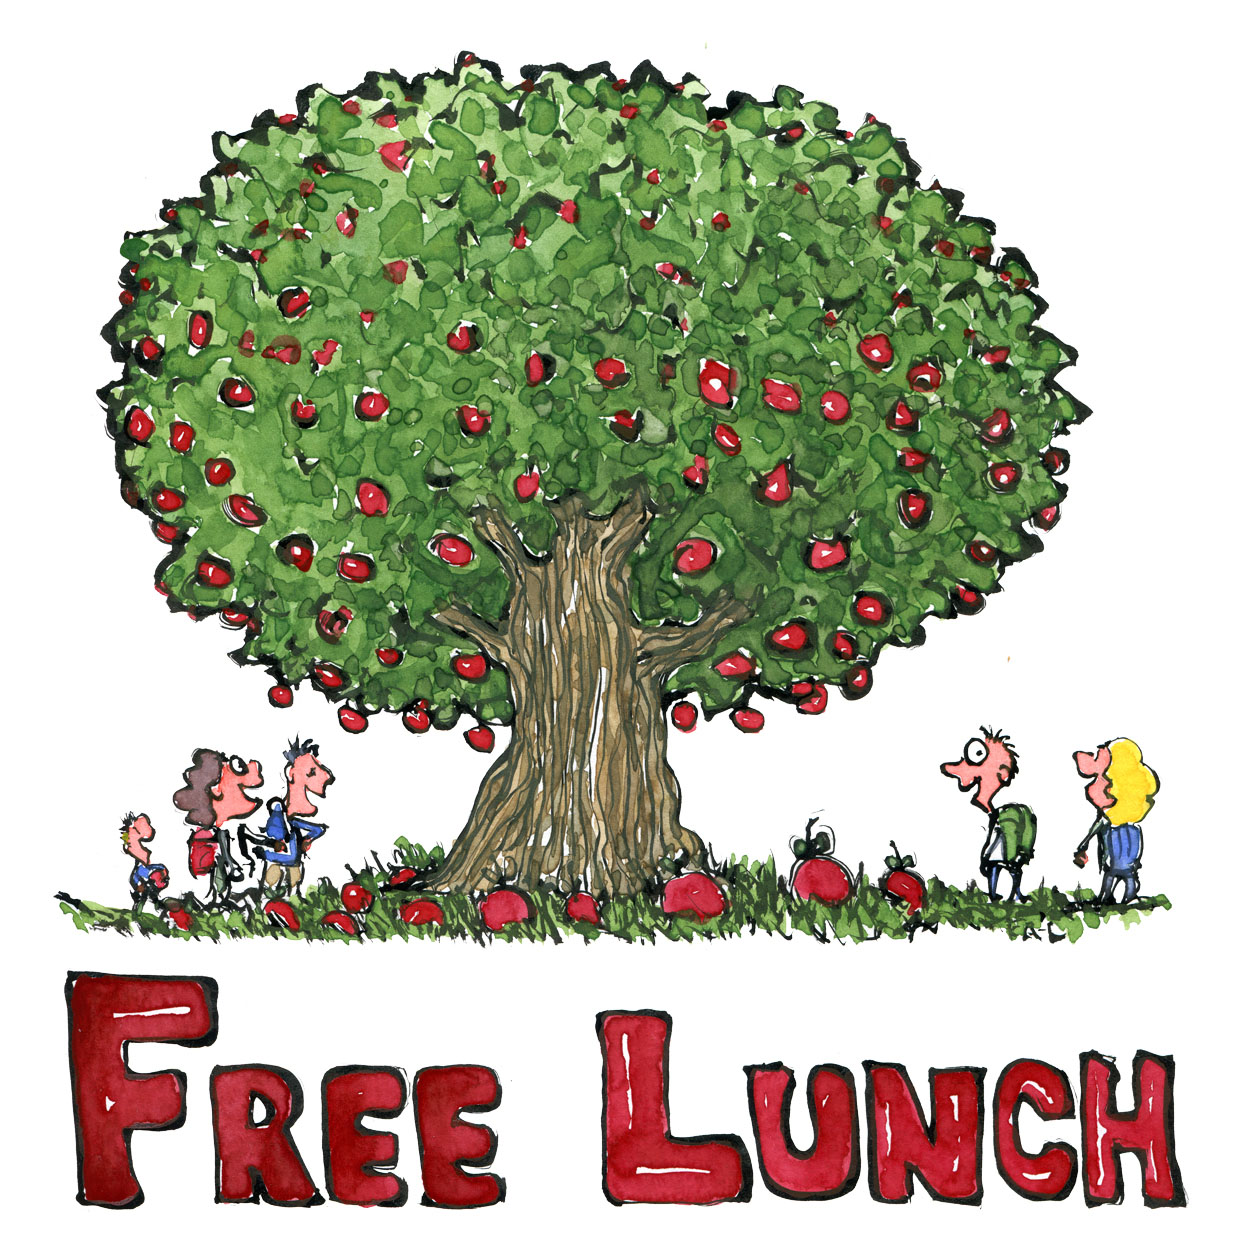 Free lunch - wild apple tree with apples in nature with smiling hikers and the text free lunch